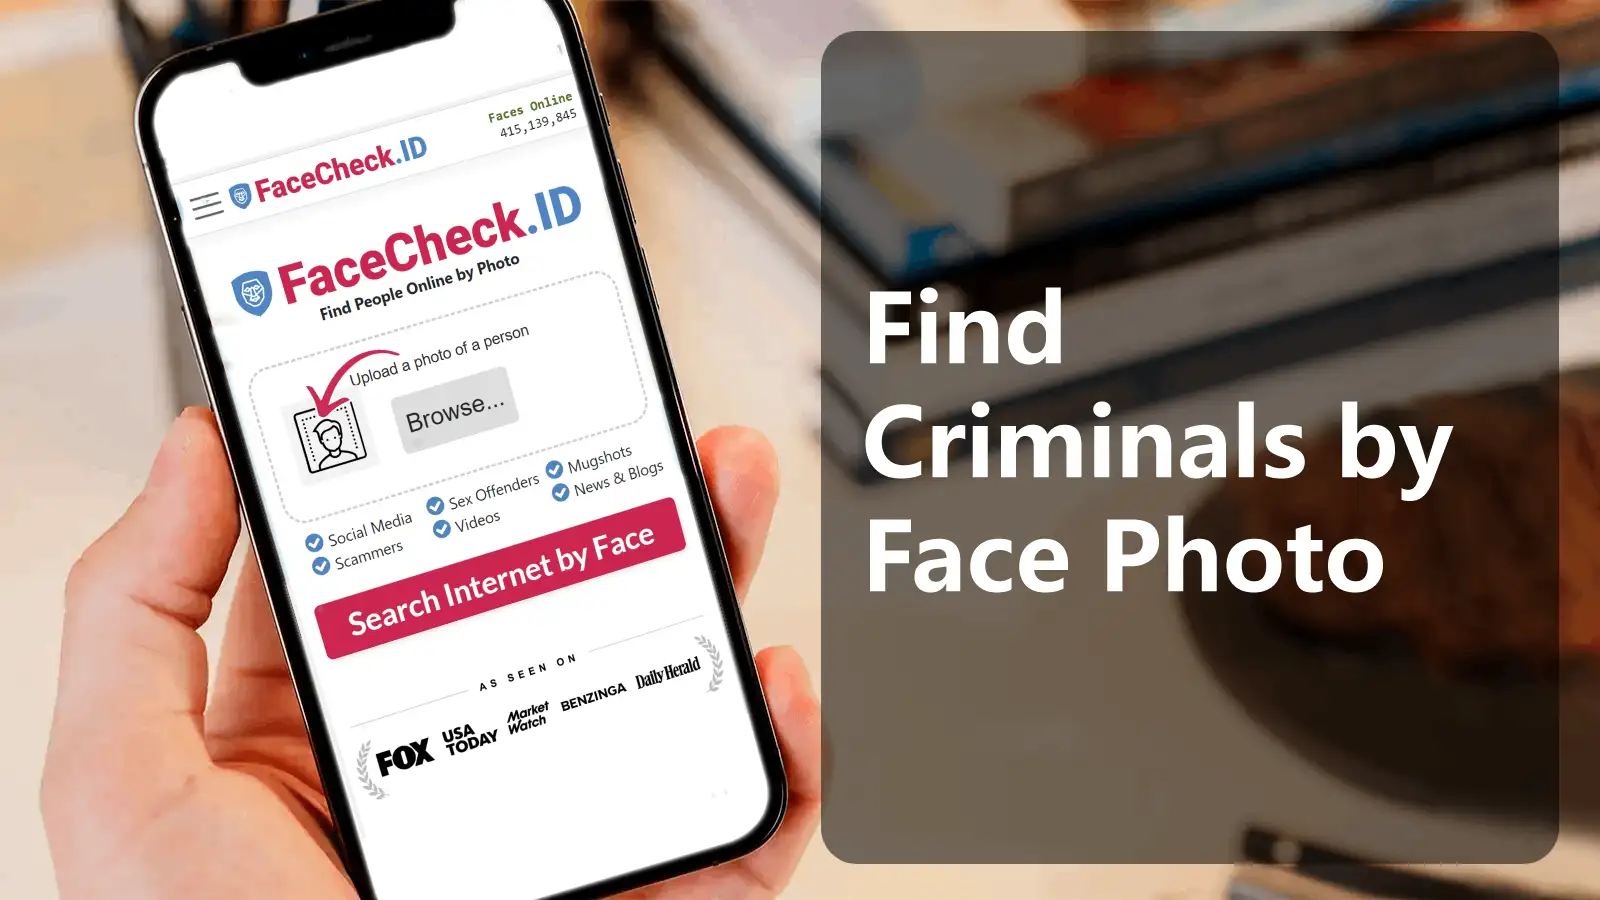 Find Criminals by Face Pic